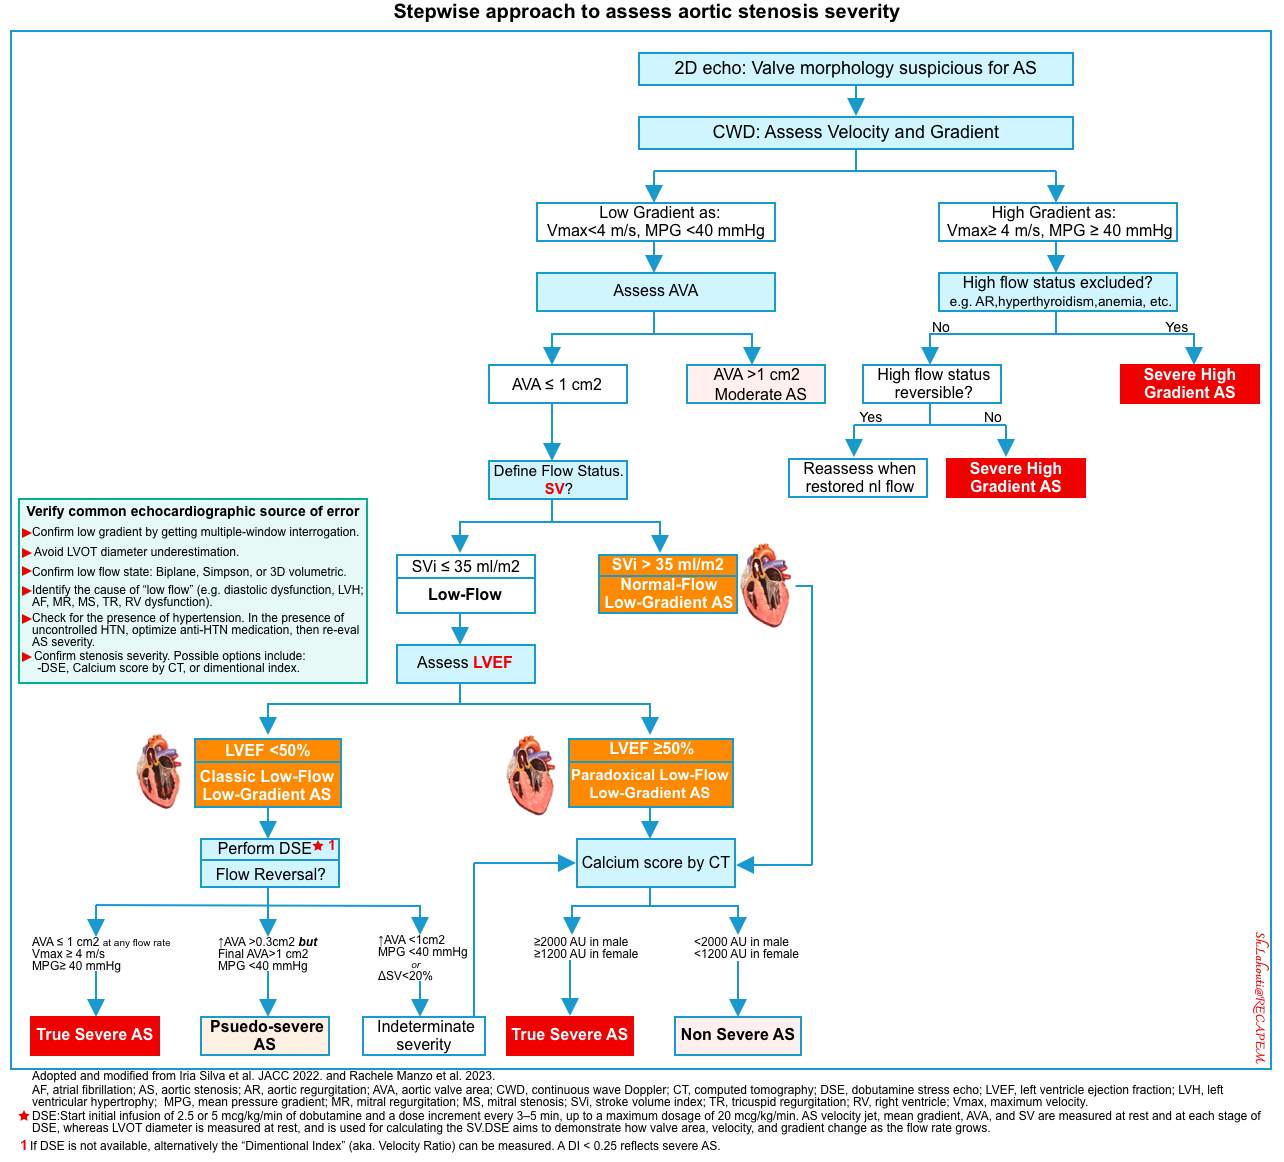 severity of aortic stenosis evaluation